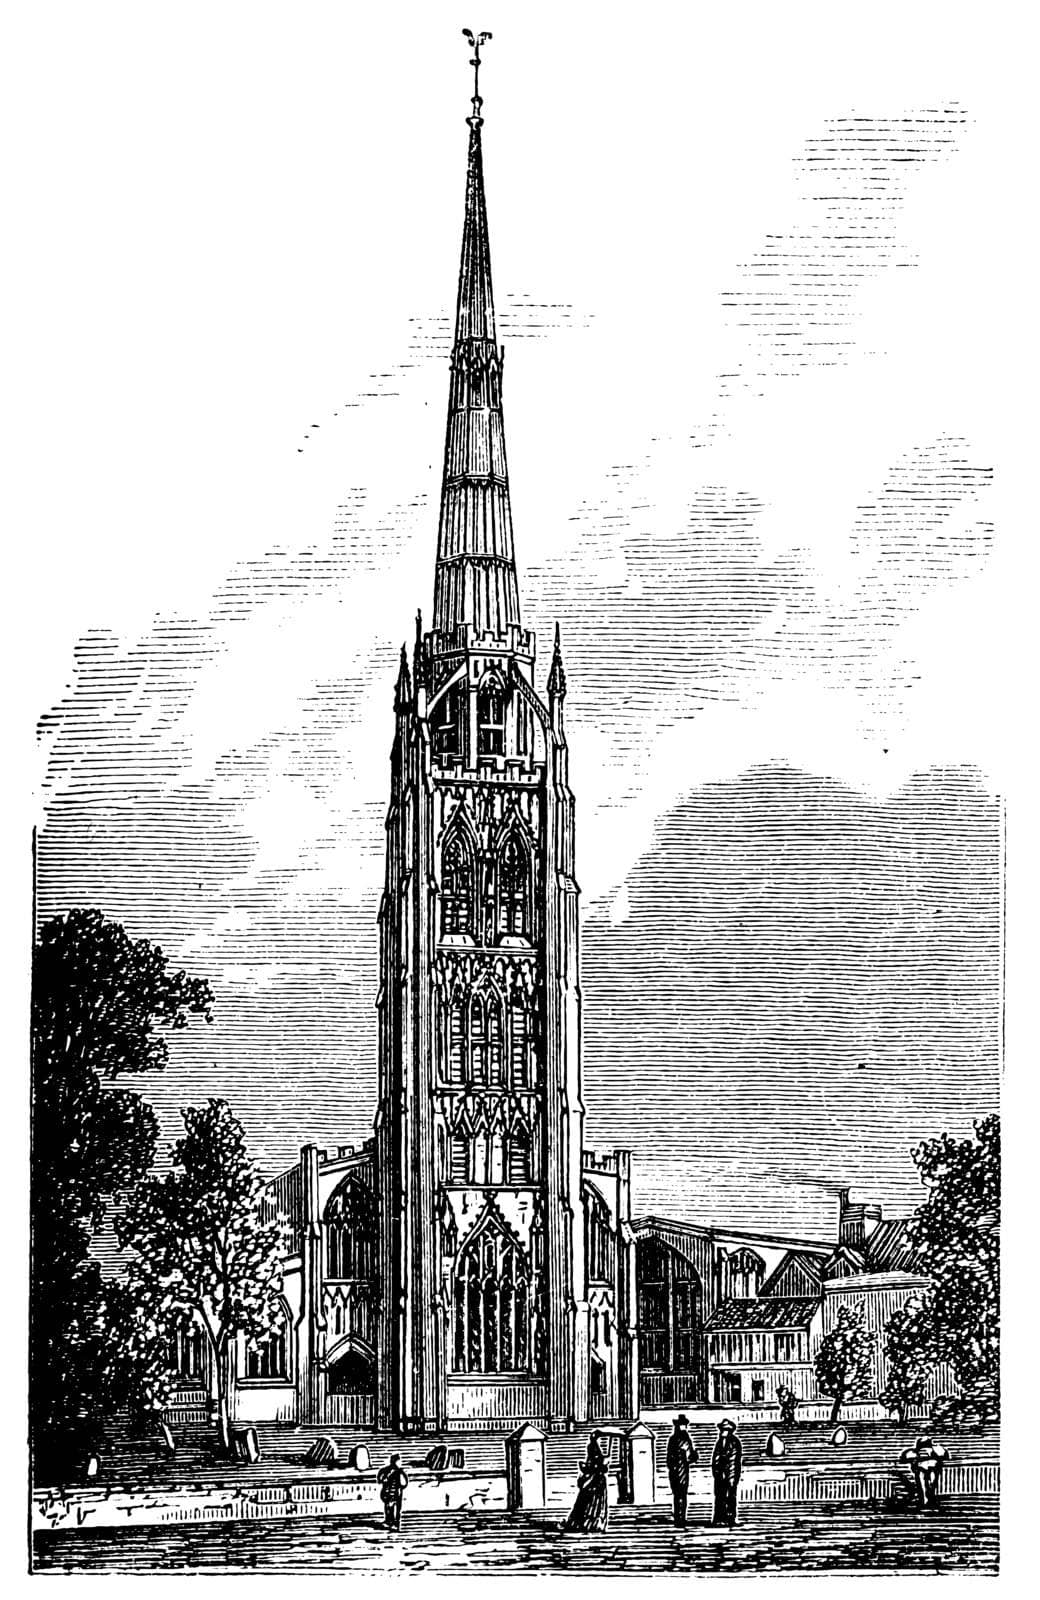 Coventry Cathedral or Saint Michael's Cathedral in England, United Kingdom, during the 1890s, vintage engraving. Old engraved illustration of Coventry Cathedral showing the bell tower.